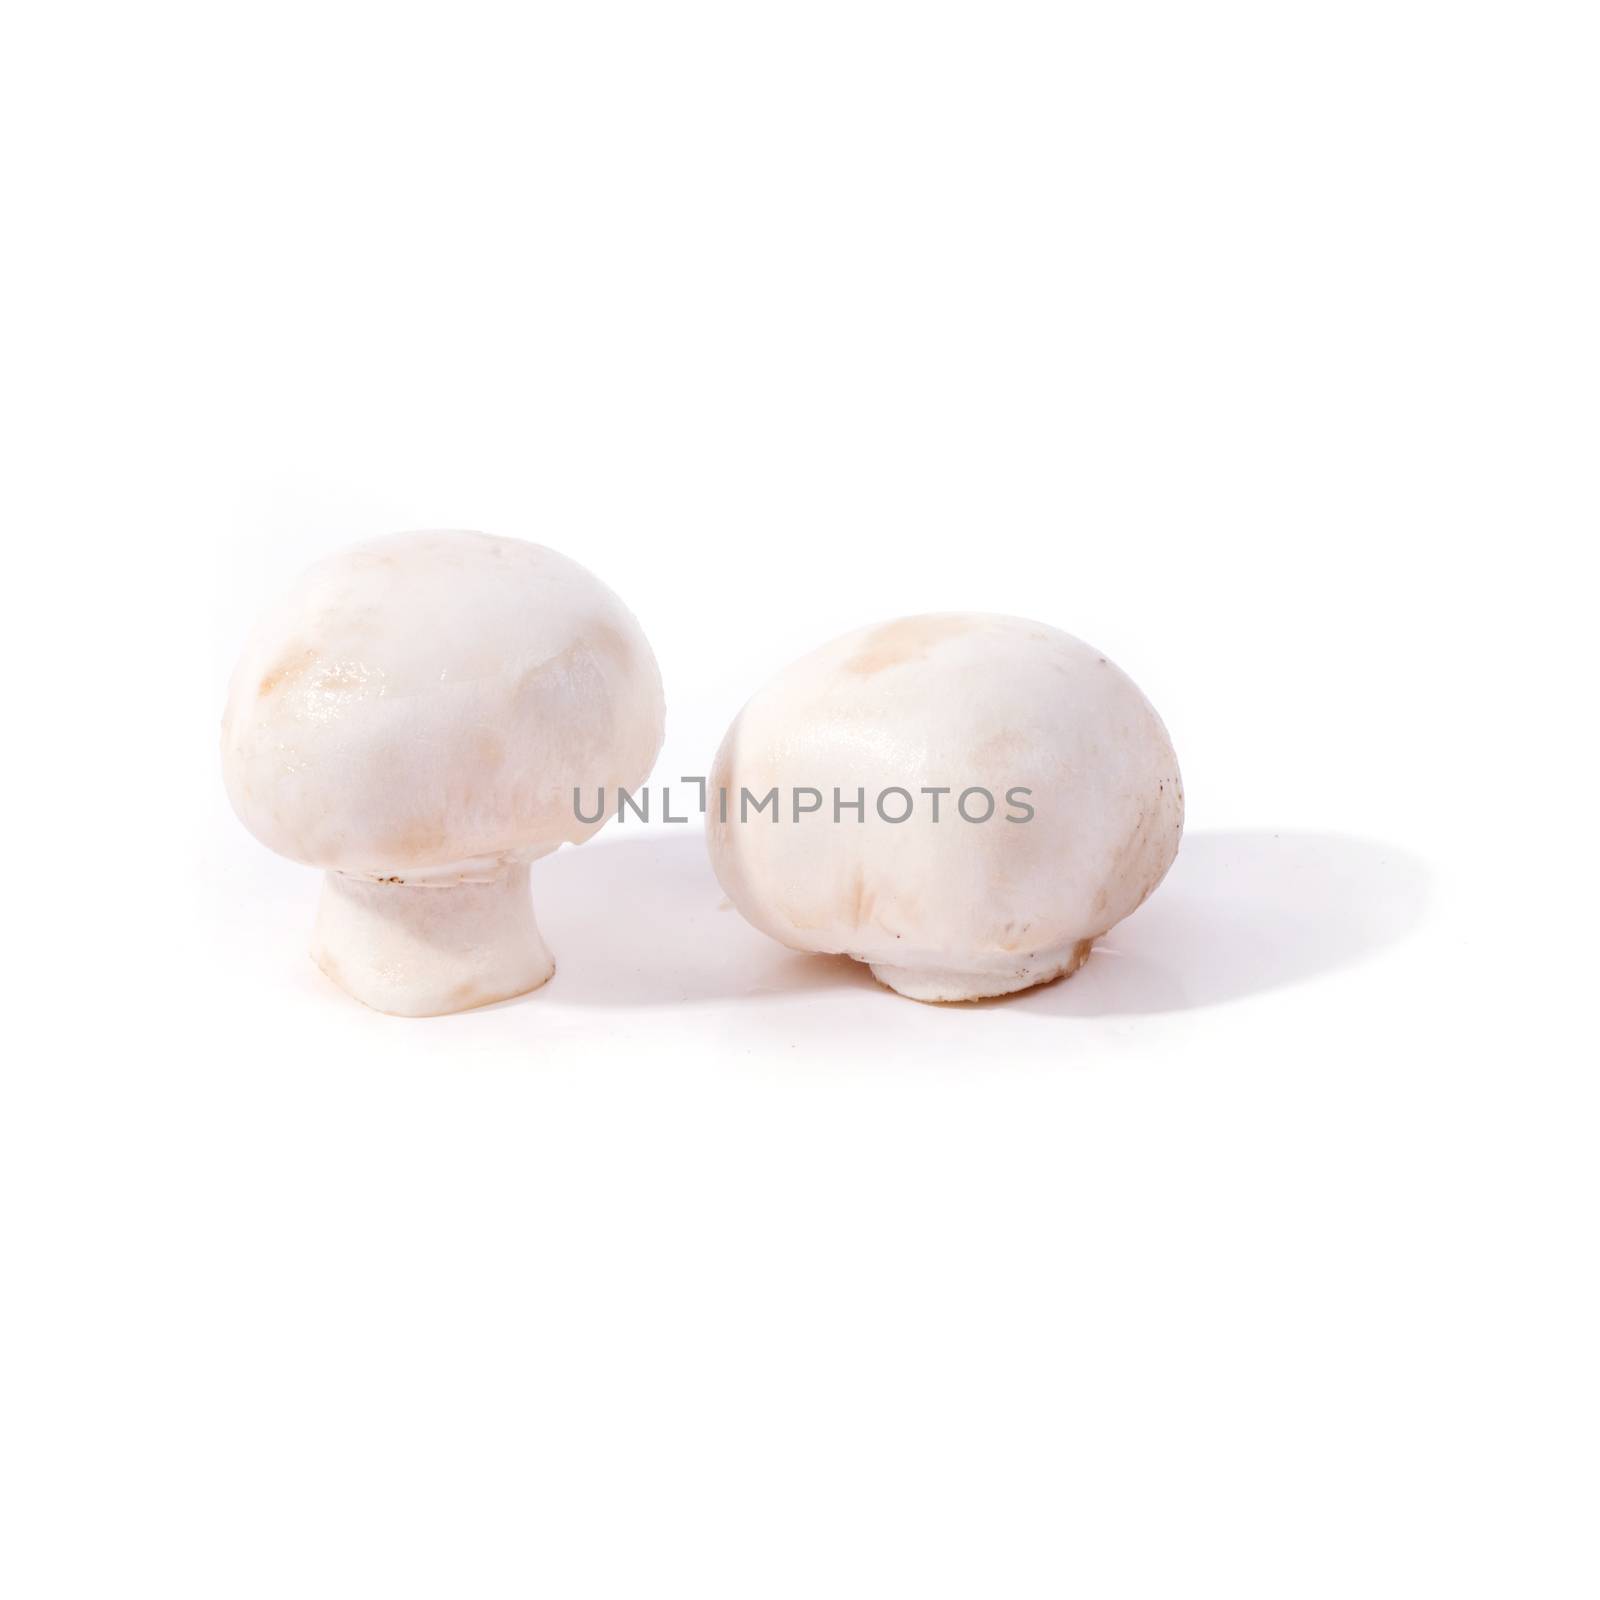 Few of mushrooms on a white background